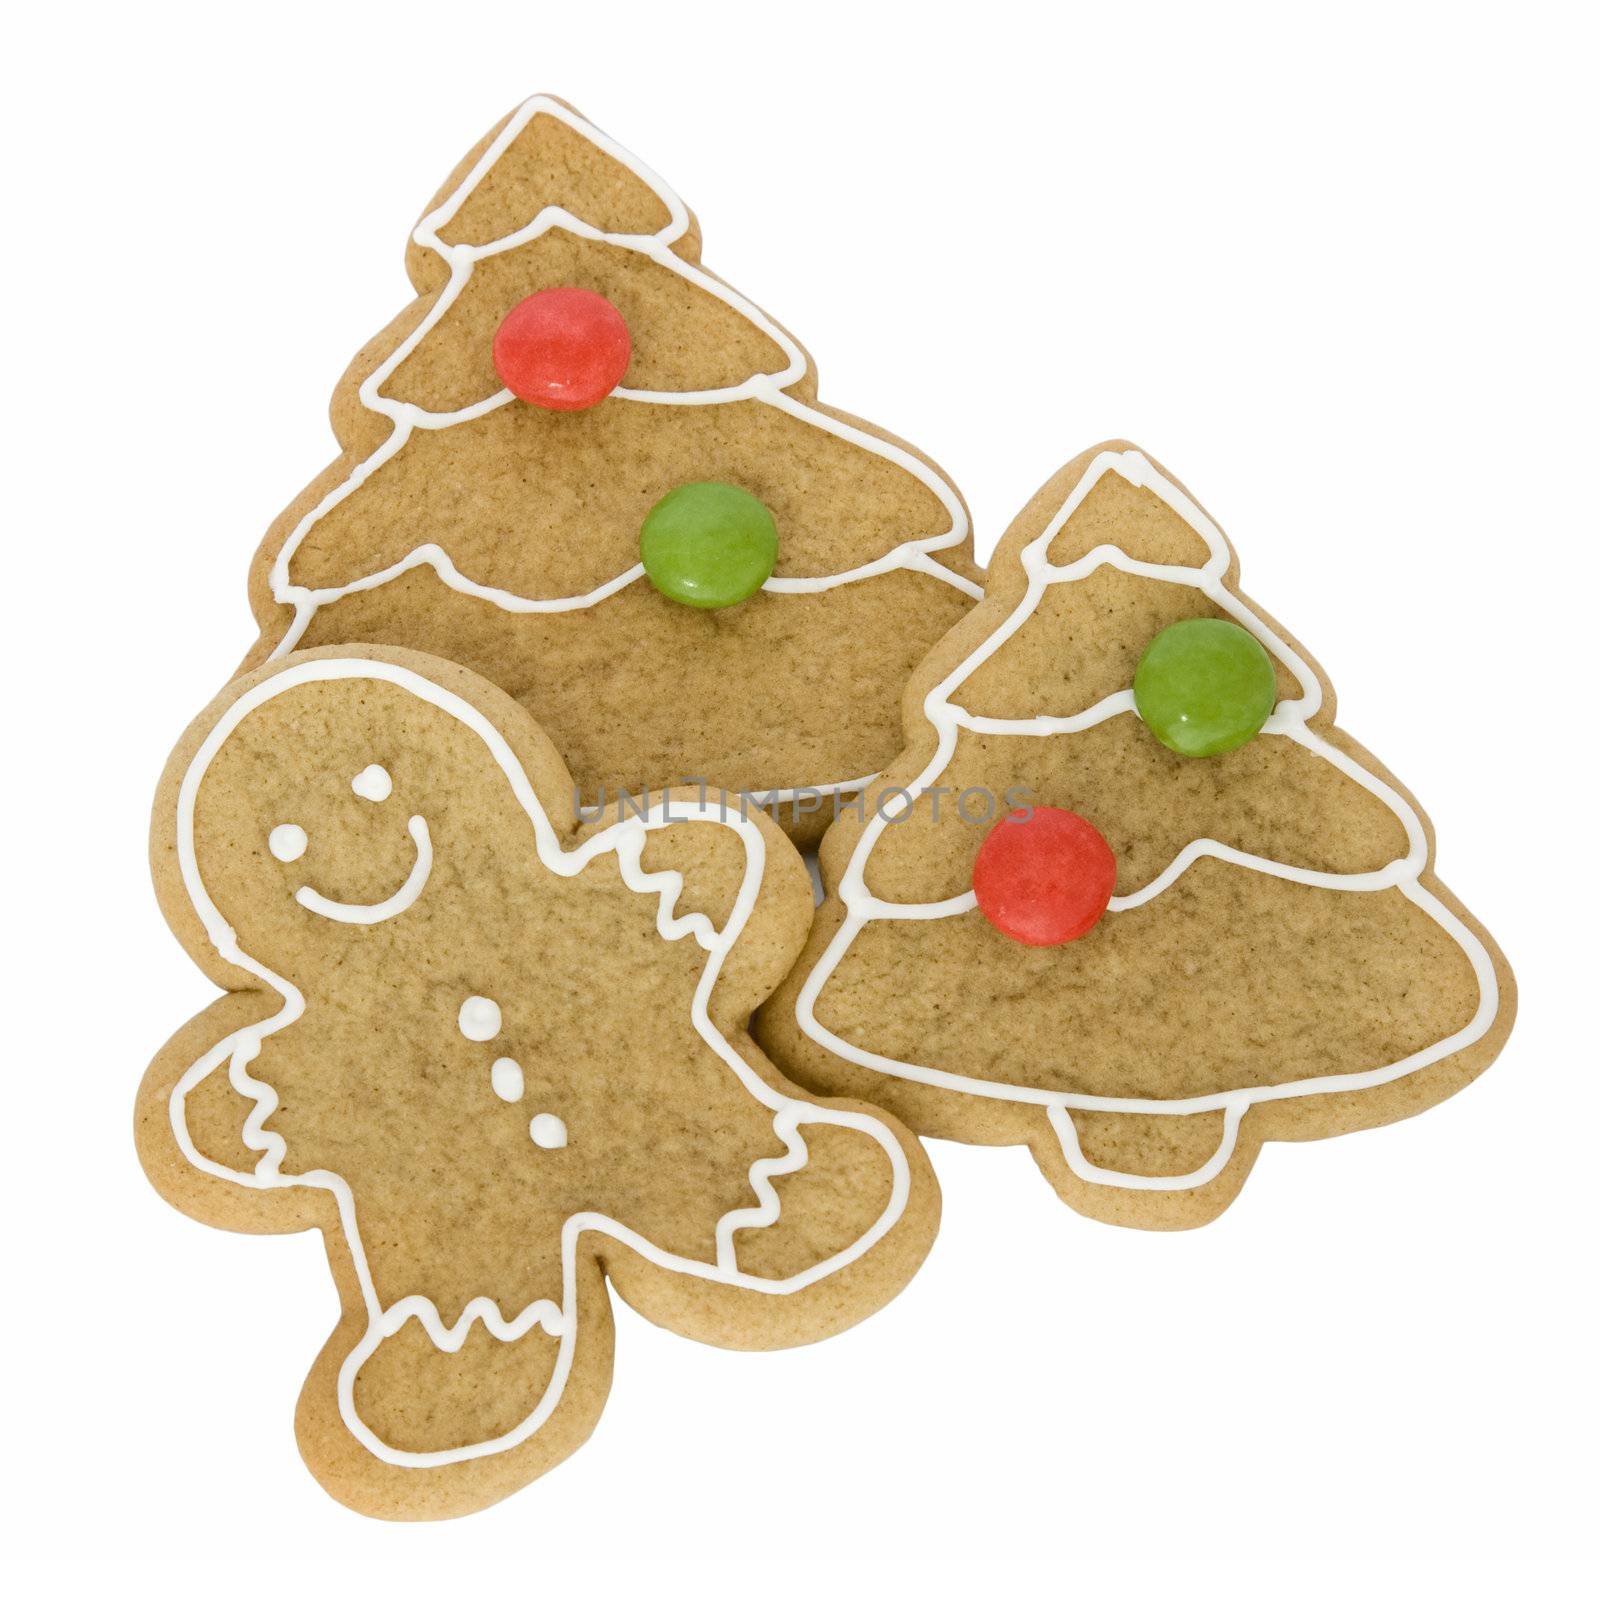 Gingerbread man with Christmas cookies by RuthBlack